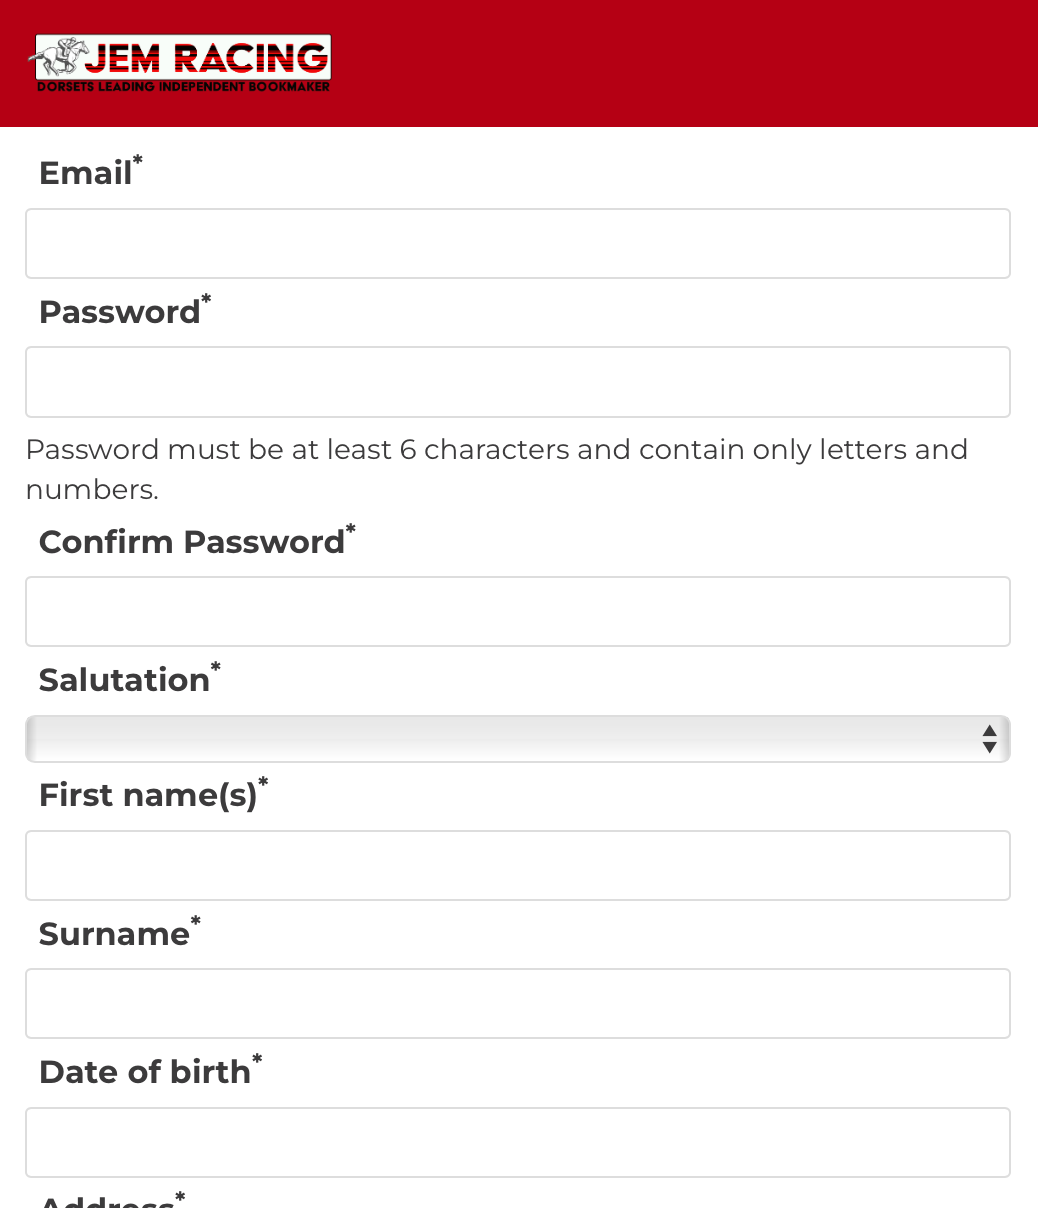 Enter your email address, choose a title and password, and enter your date of birth